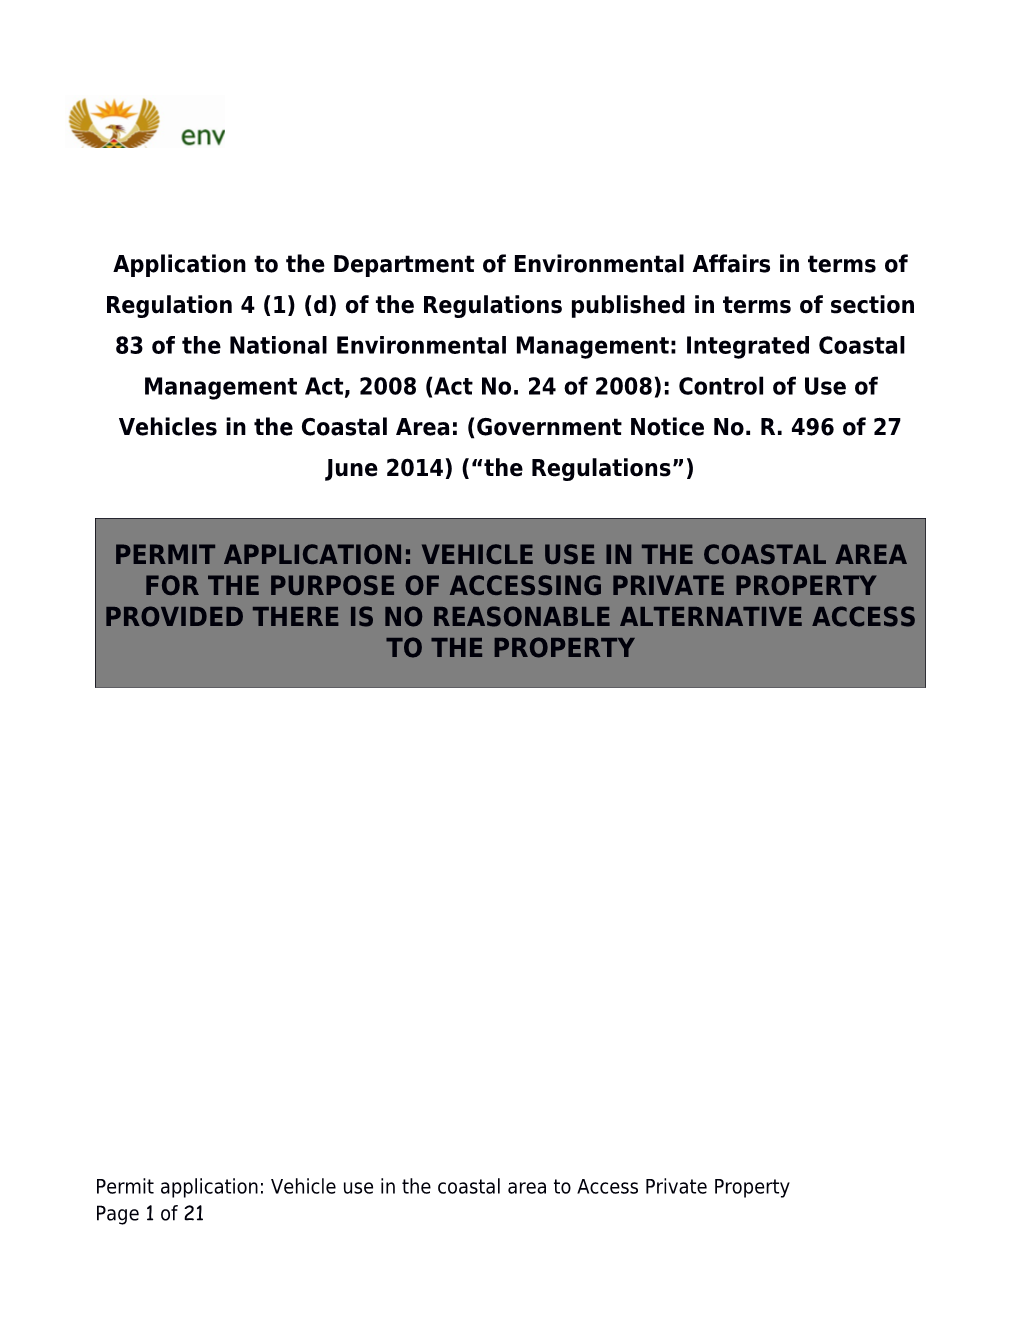 Application to the Department of Environmental Affairs in Terms of Regulation 4 (1) (D)